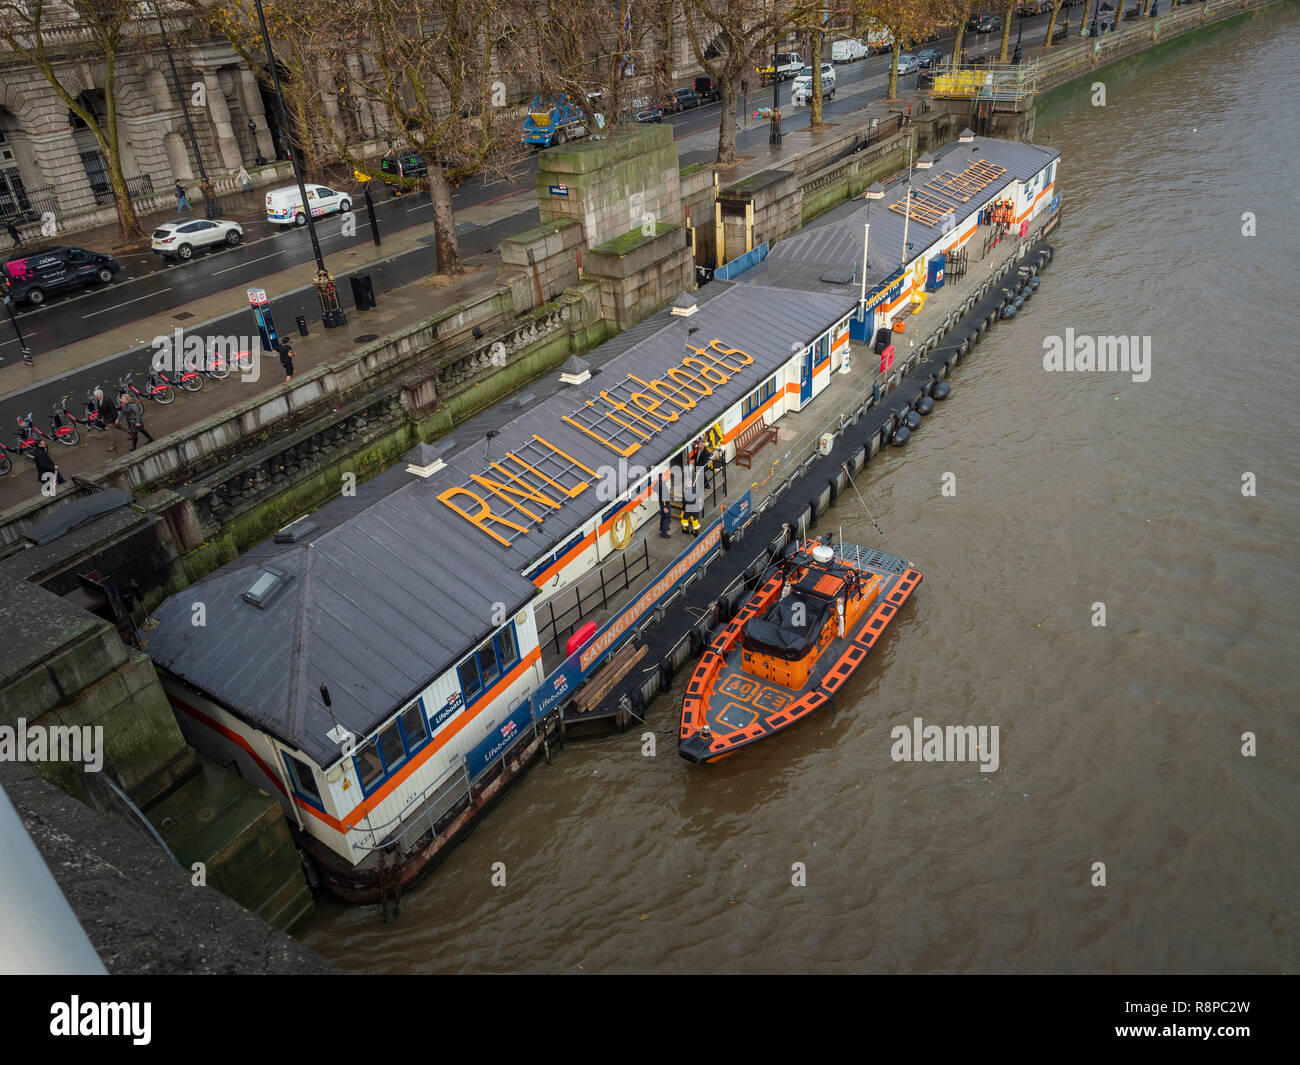 RNLI Lifeboat station for river rescue crews, River Thames, London, UK. Stock Photo